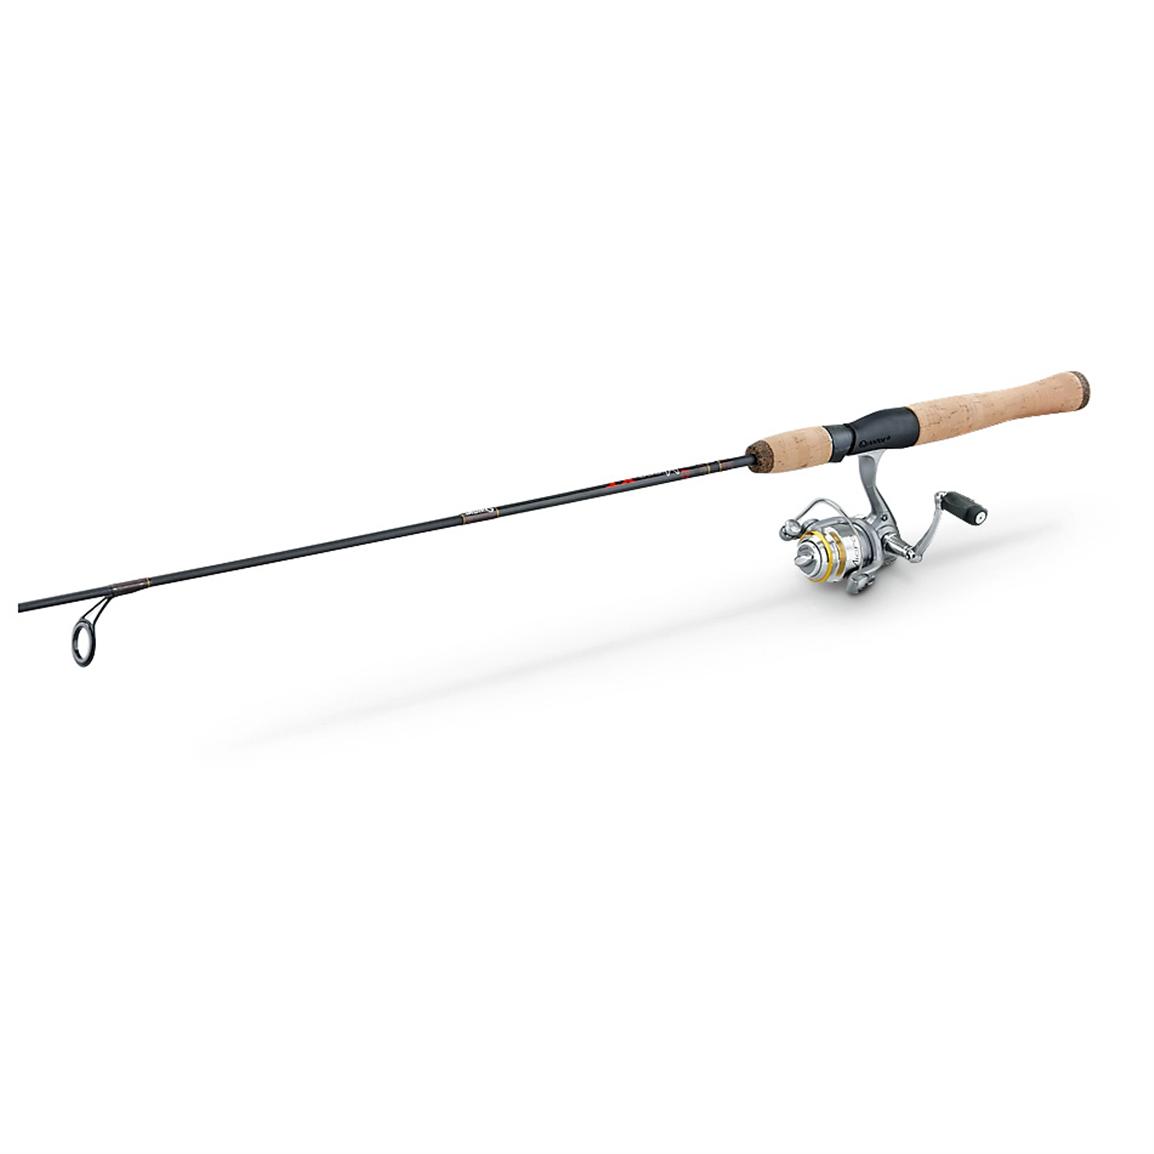 Shakespeare Micro Spinning Rod Review